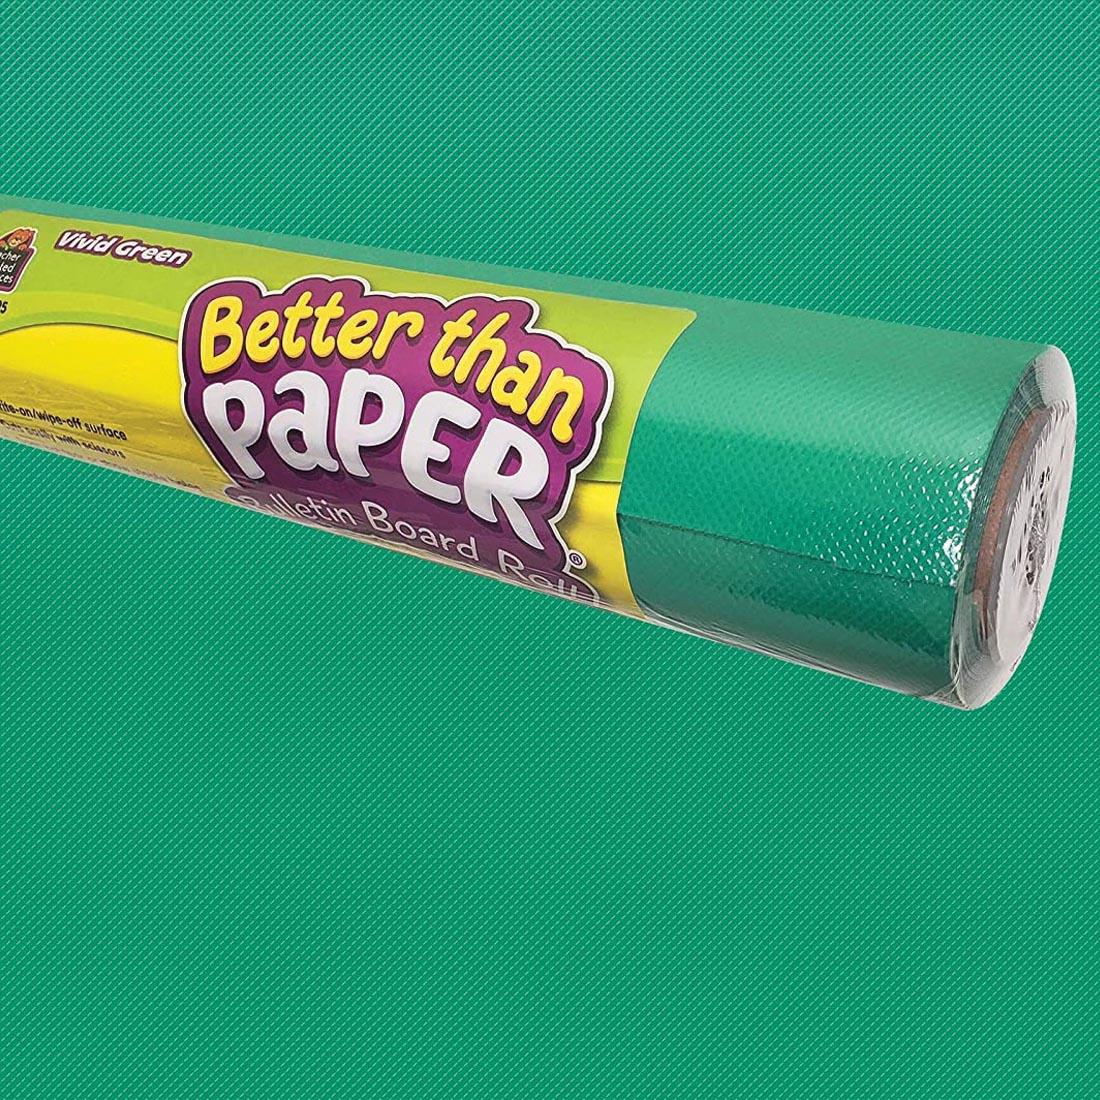 Vivid Green Better Than Paper Bulletin Board Roll with it shown in use in the background